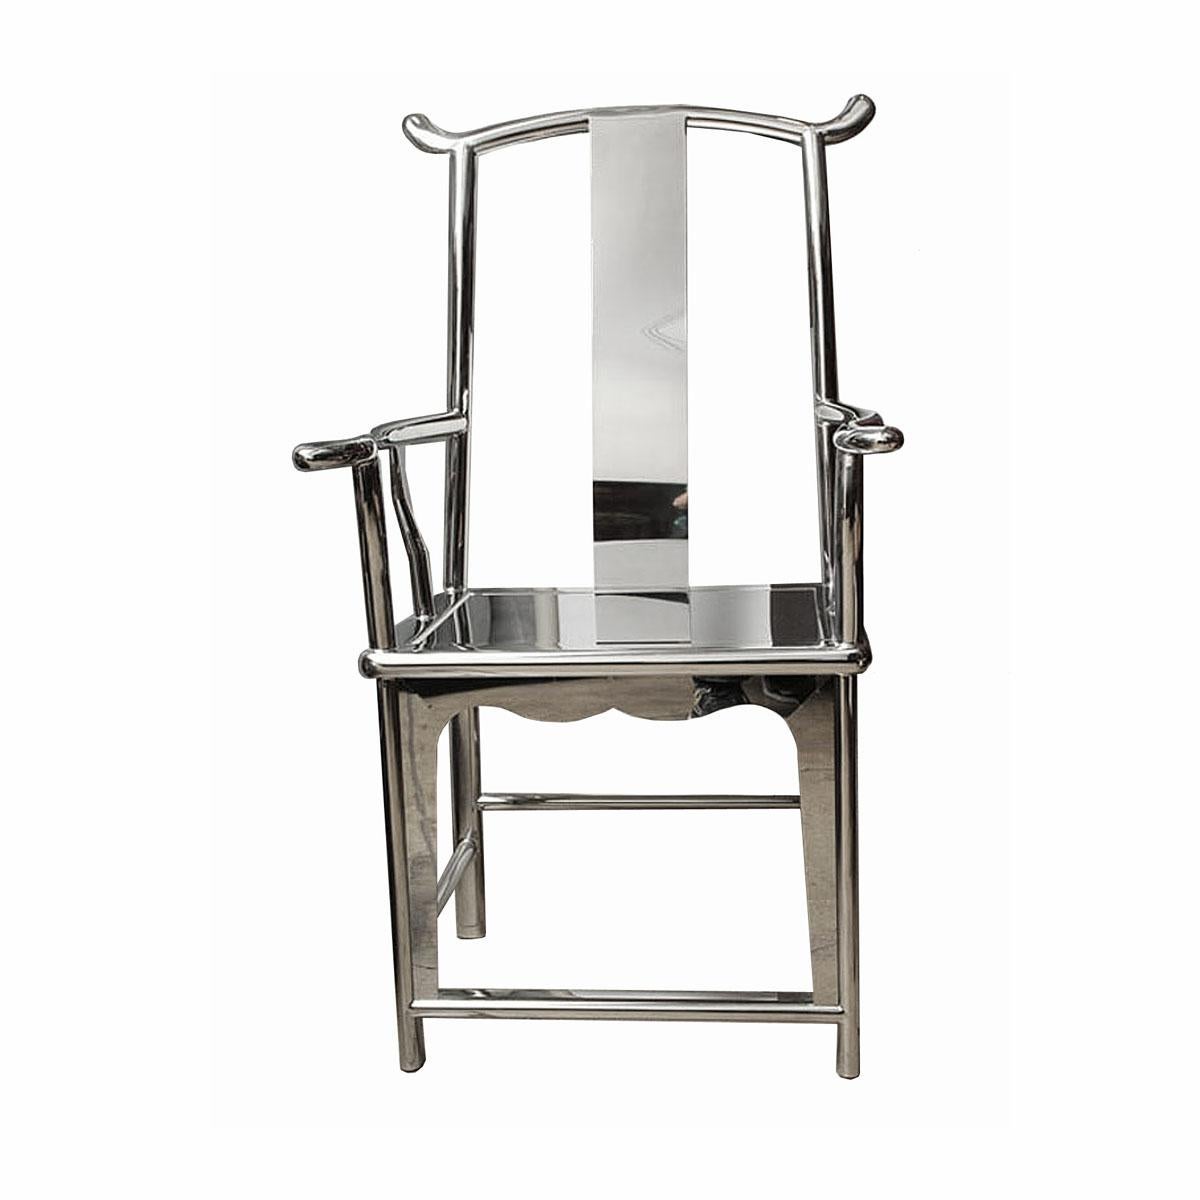 An Official's hat style armchair, reproduced in stainless steel. A classic Asian piece, reinvented in a contemporary way. A great piece for a modern decoration with an exotic touch.